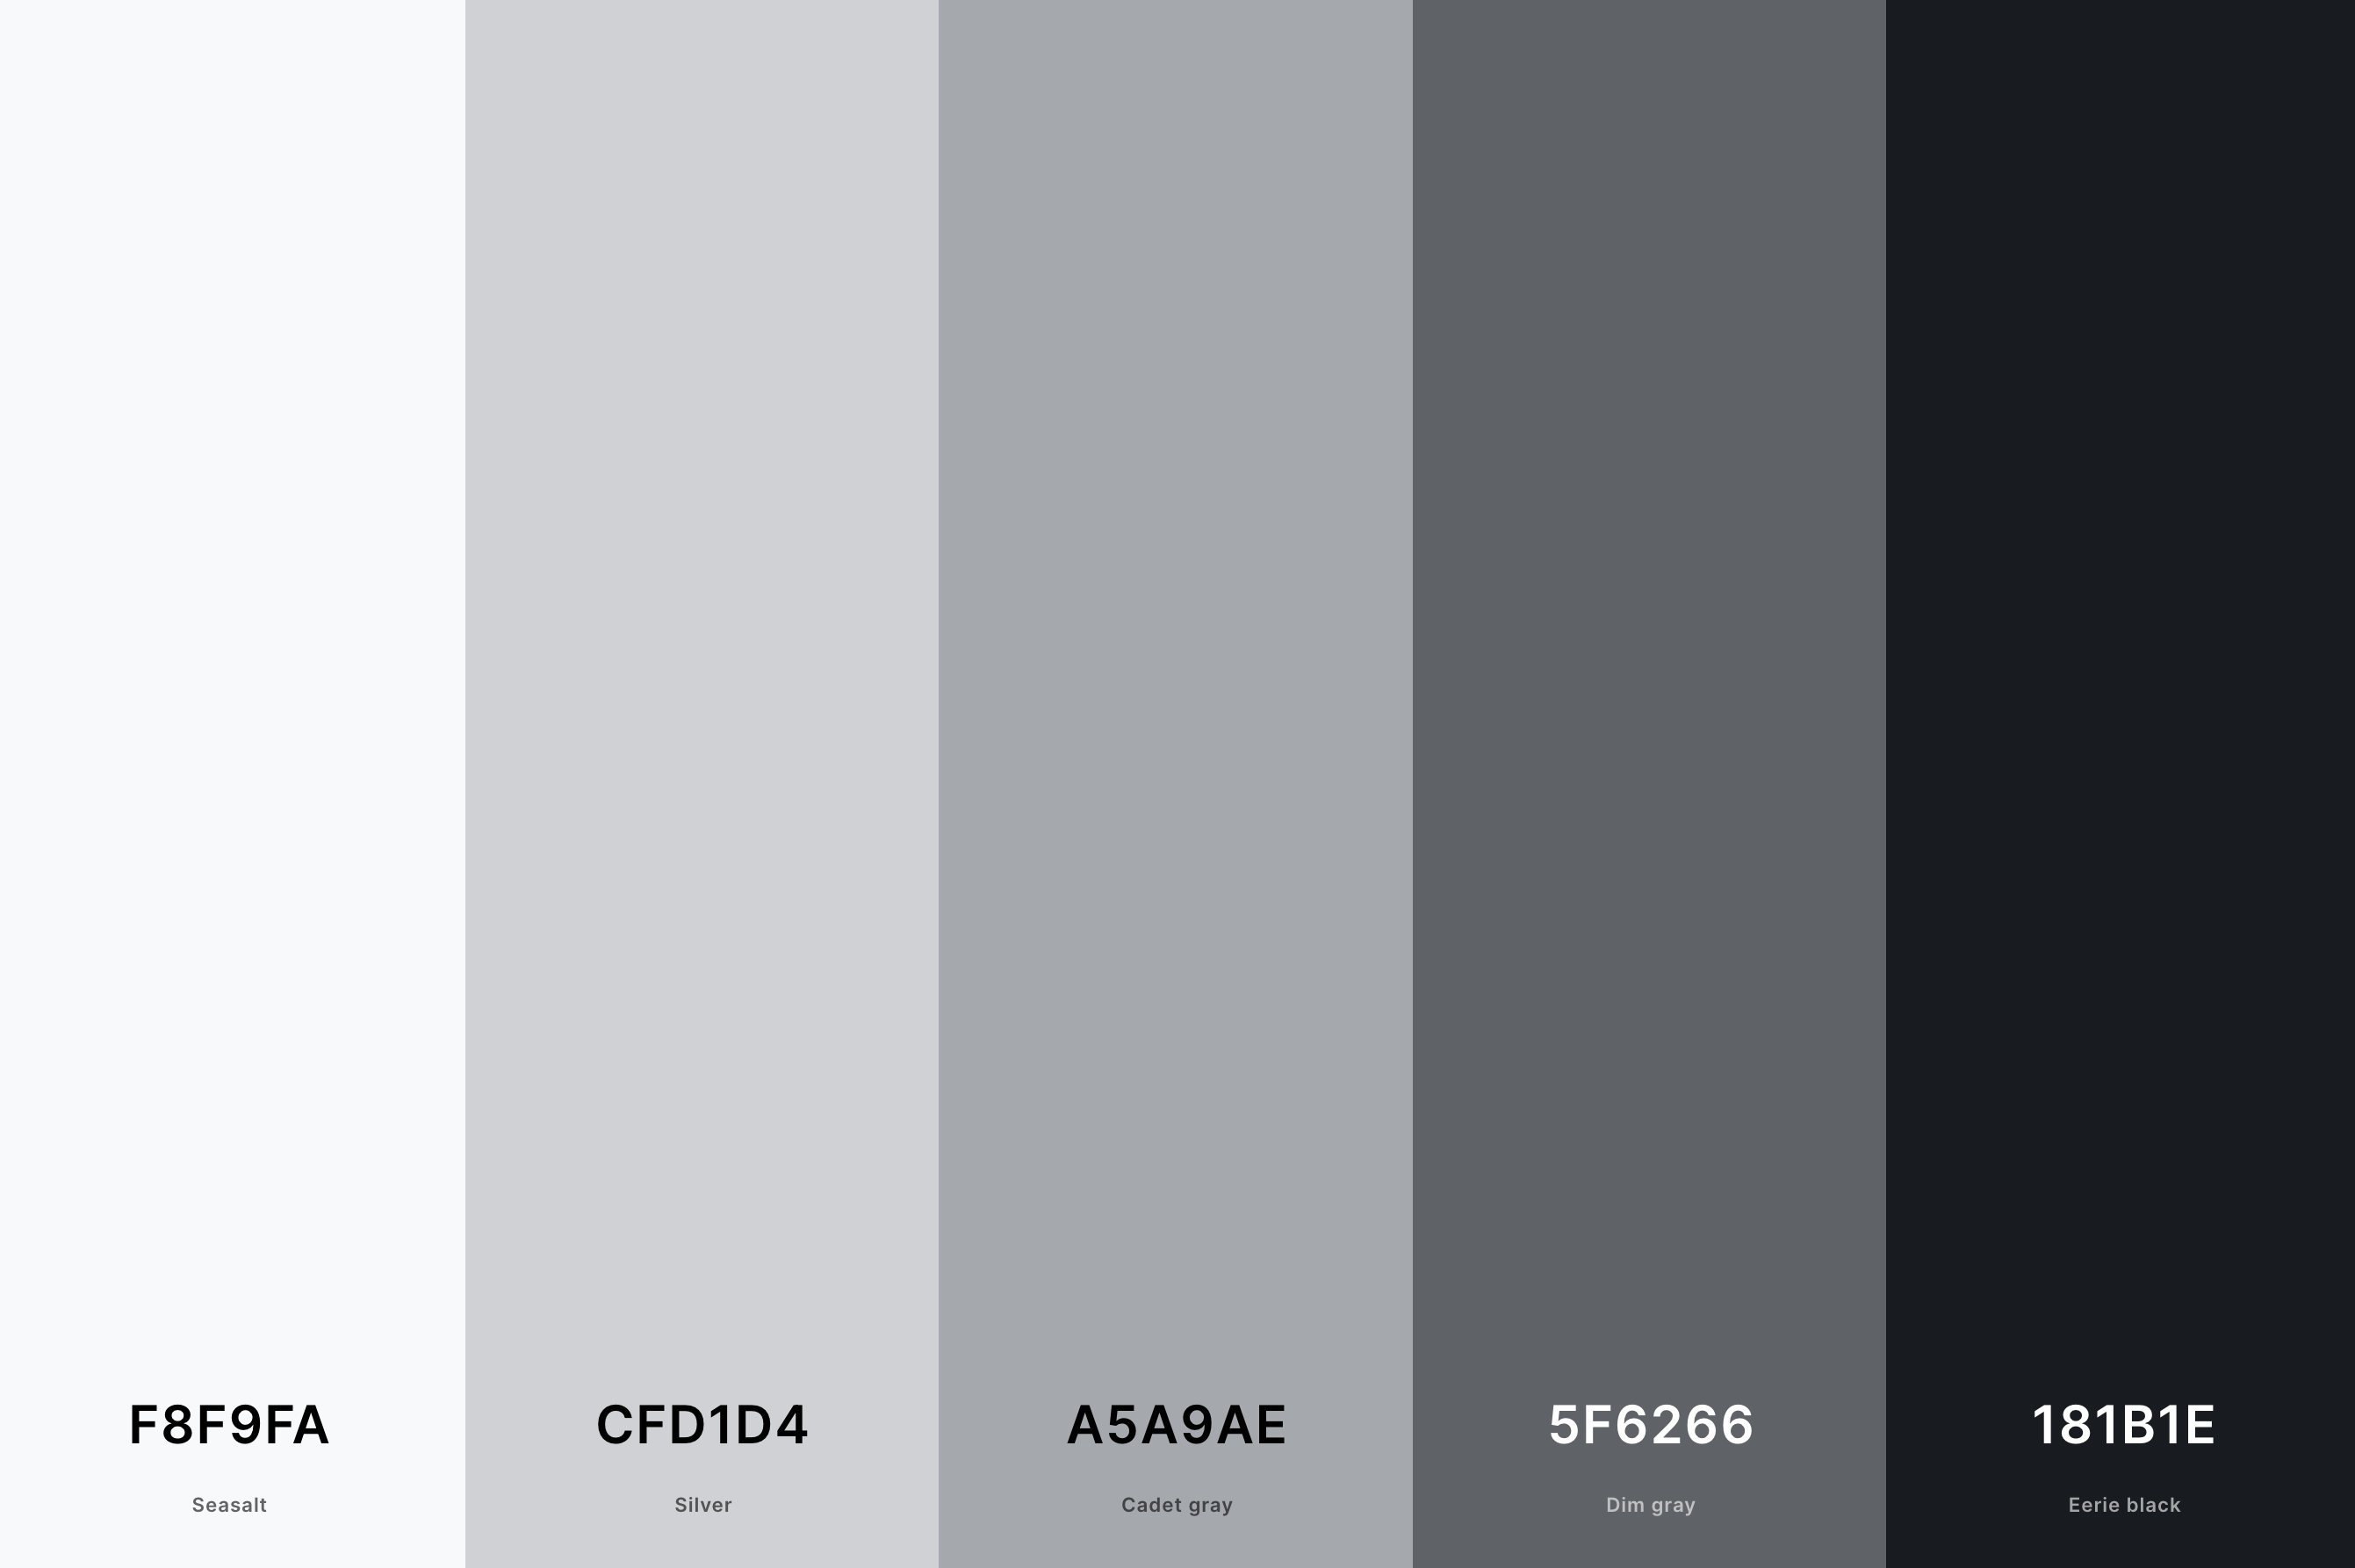 2. Black And White Color Palette Color Palette with Seasalt (Hex #F8F9FA) + Silver (Hex #CFD1D4) + Cadet Gray (Hex #A5A9AE) + Dim Gray (Hex #5F6266) + Eerie Black (Hex #181B1E) Color Palette with Hex Codes